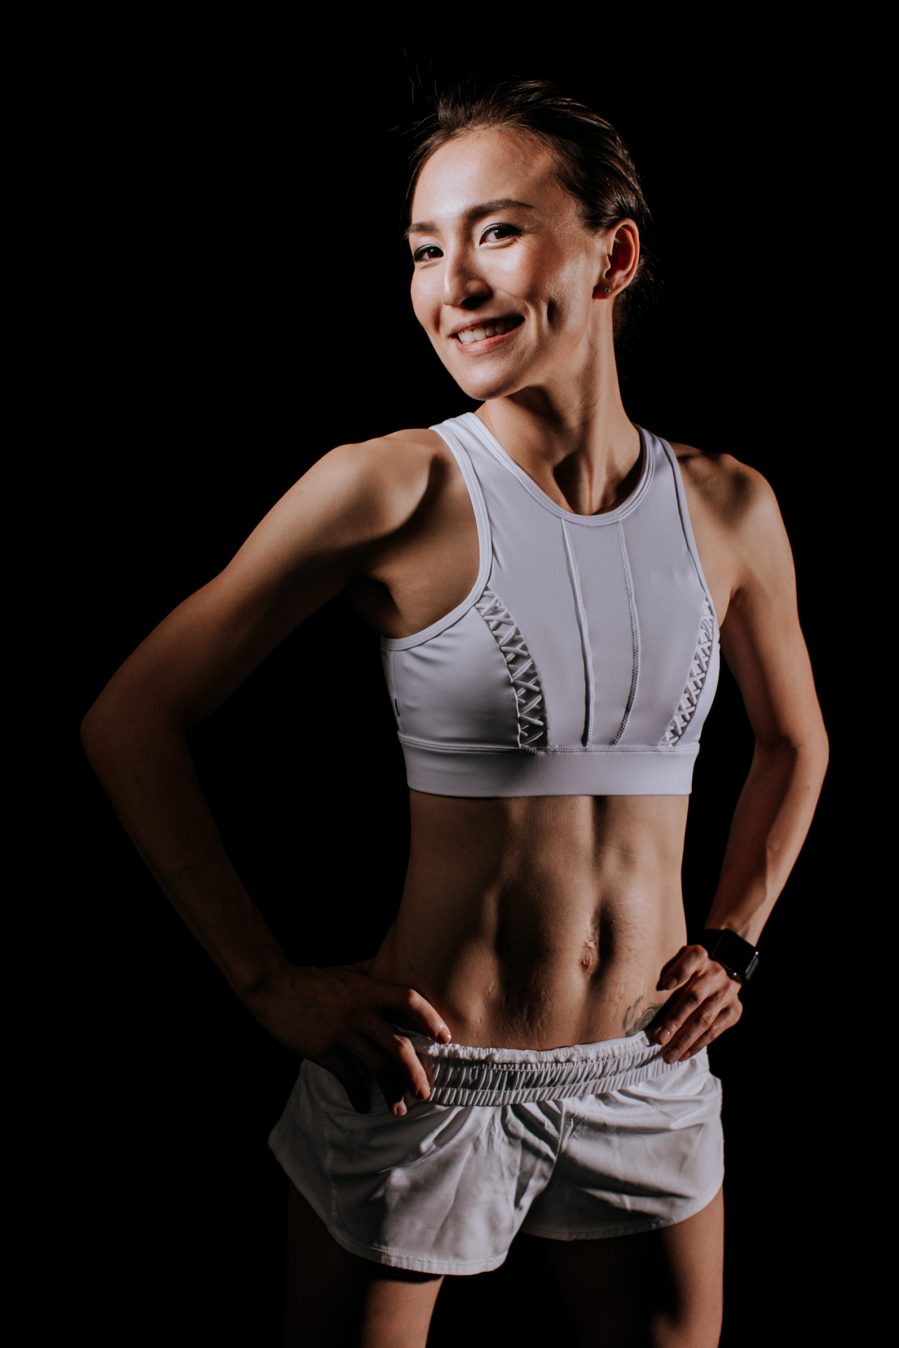 Fitness Portrait Photo Fitmom Woman Lady Studio Session Cliff Choong Photography Nike women